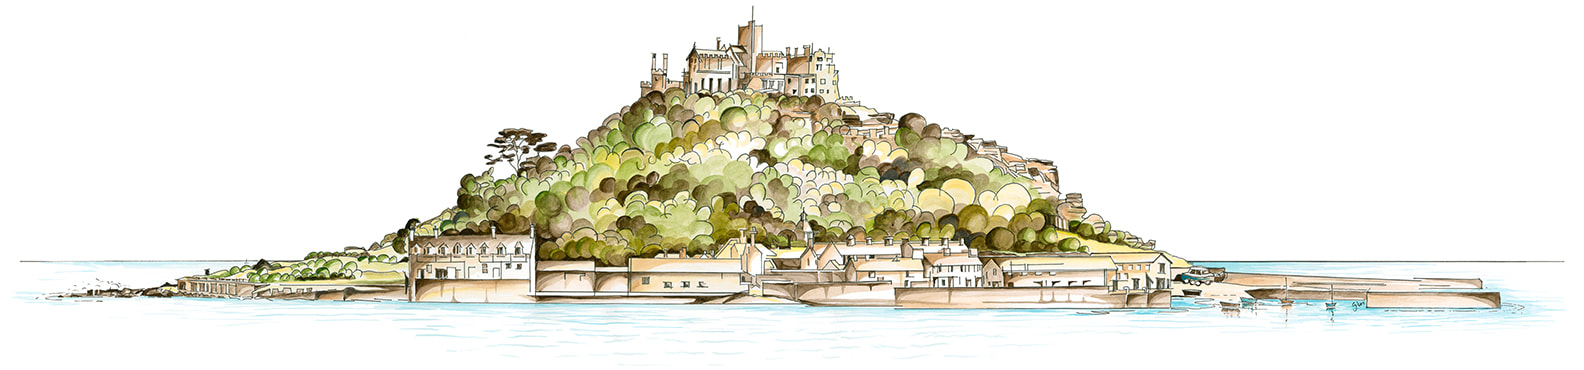 Architectural sketch of st michael's mount, cornwall